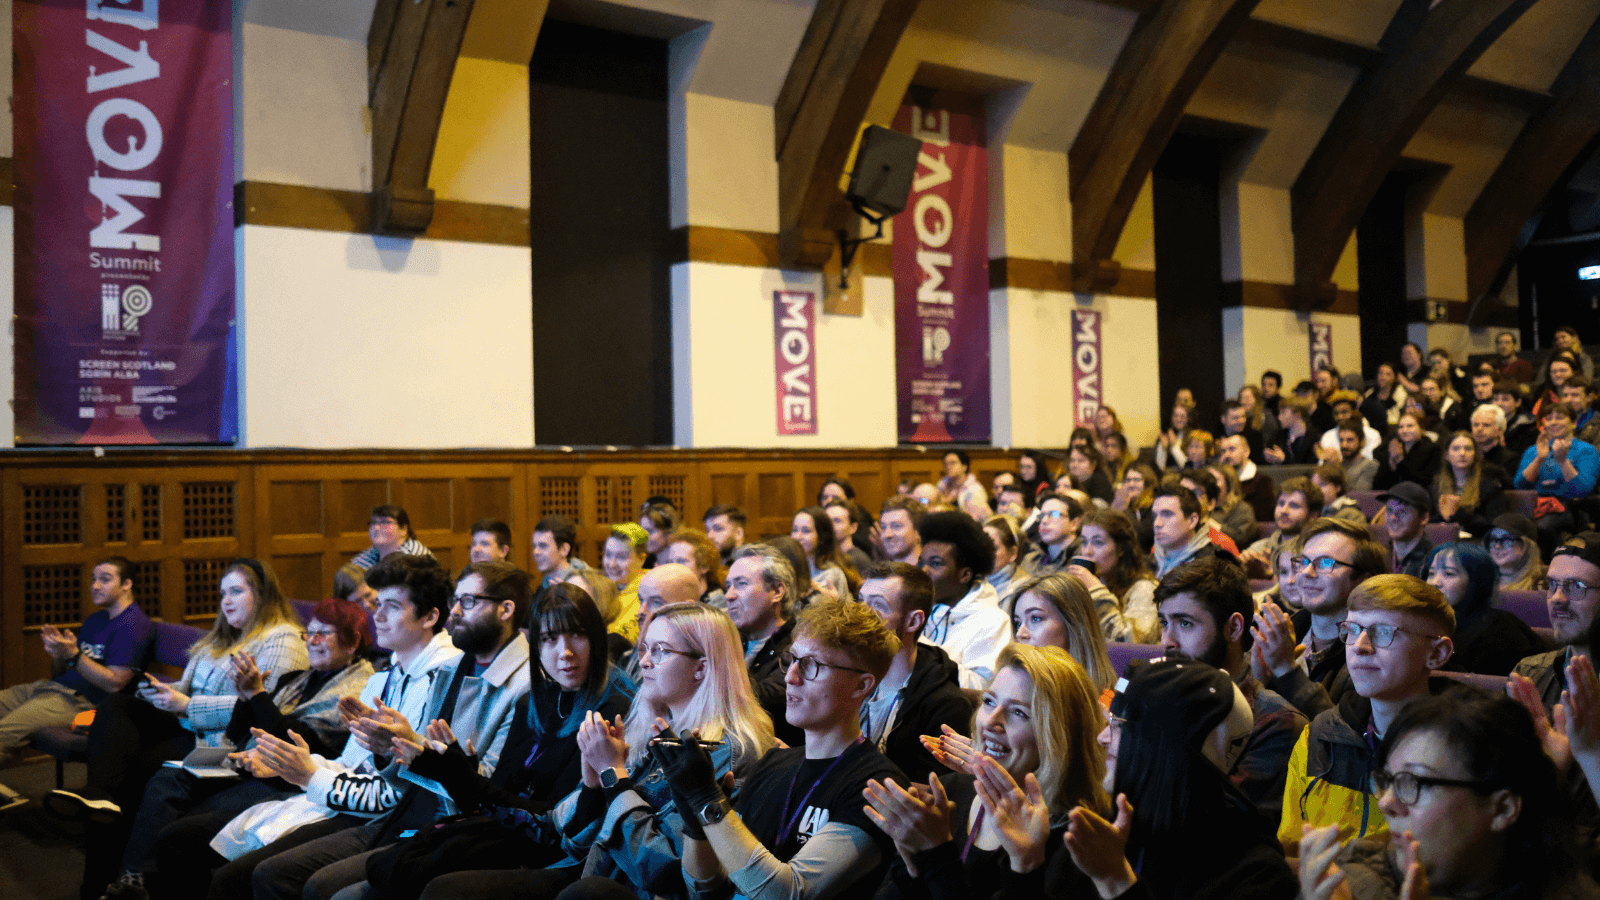 Sat in rows in the University of Edinburgh Pleasance building, an audience at the MOVE summit looks to the left of the image where the stage is off camera, and clap. The audience is a mix of ages and genders, who are clapping.